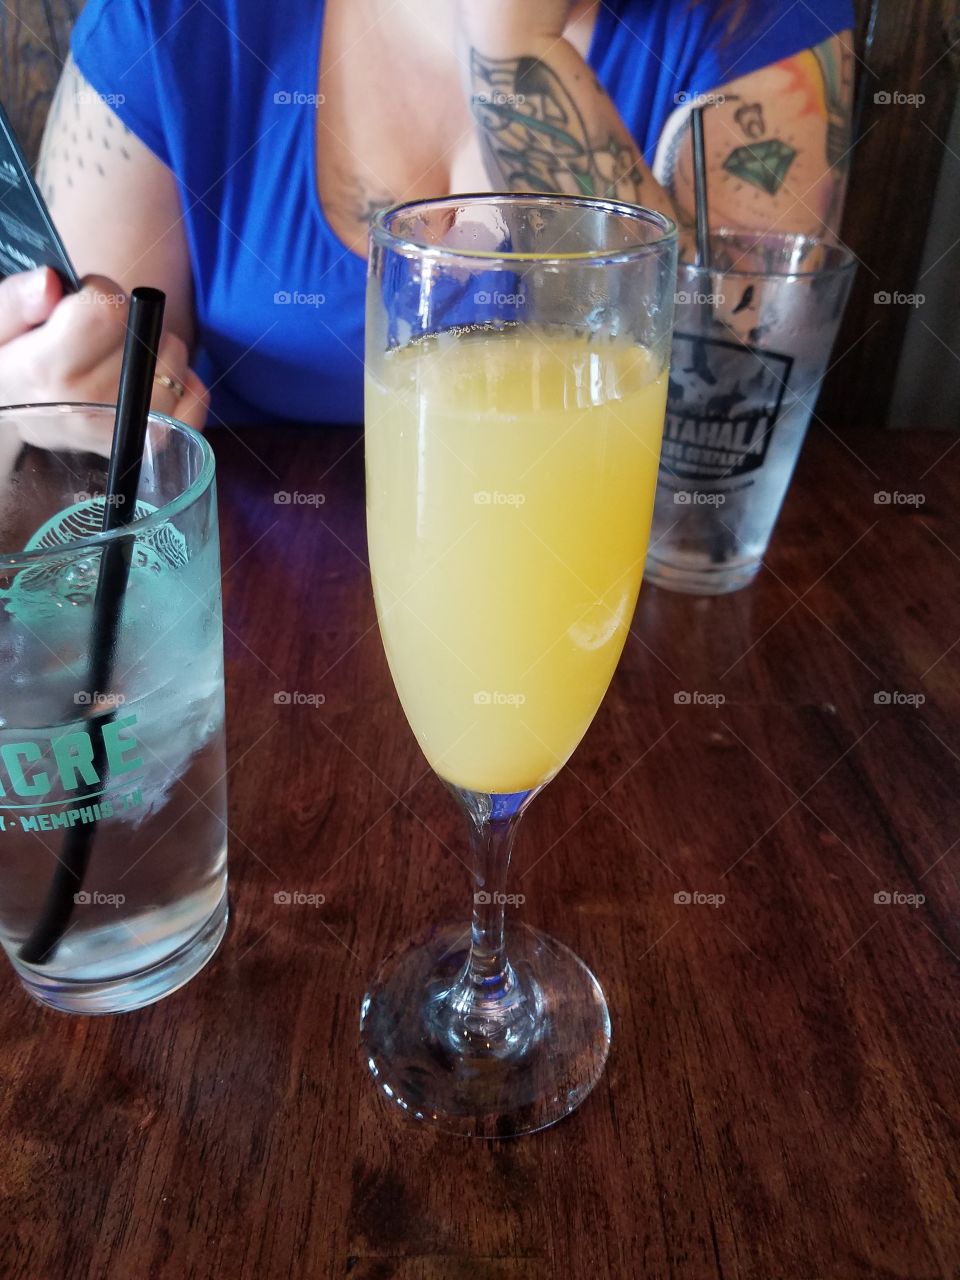 It's not brunch without mimosas. Just enough orange juice to scare the champagne.